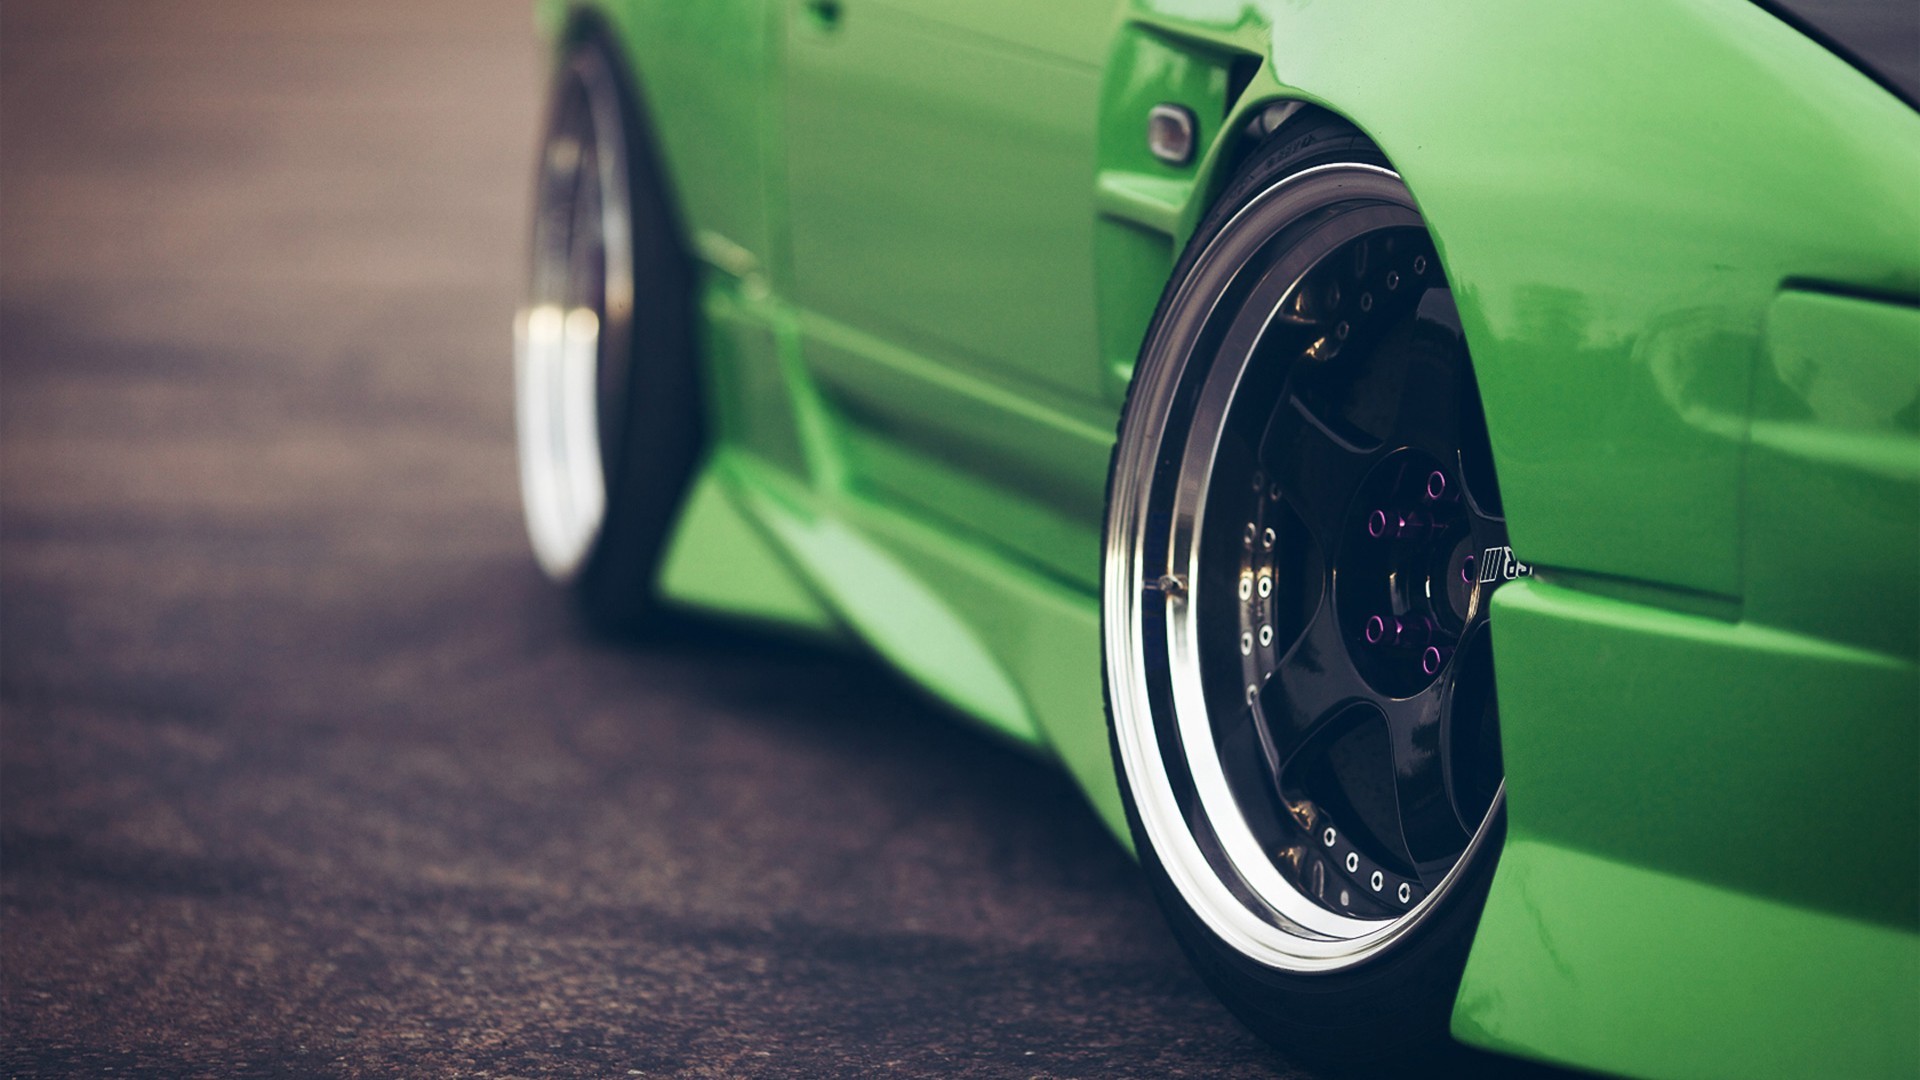 General 1920x1080 stance (cars) tuning green cars vehicle car green